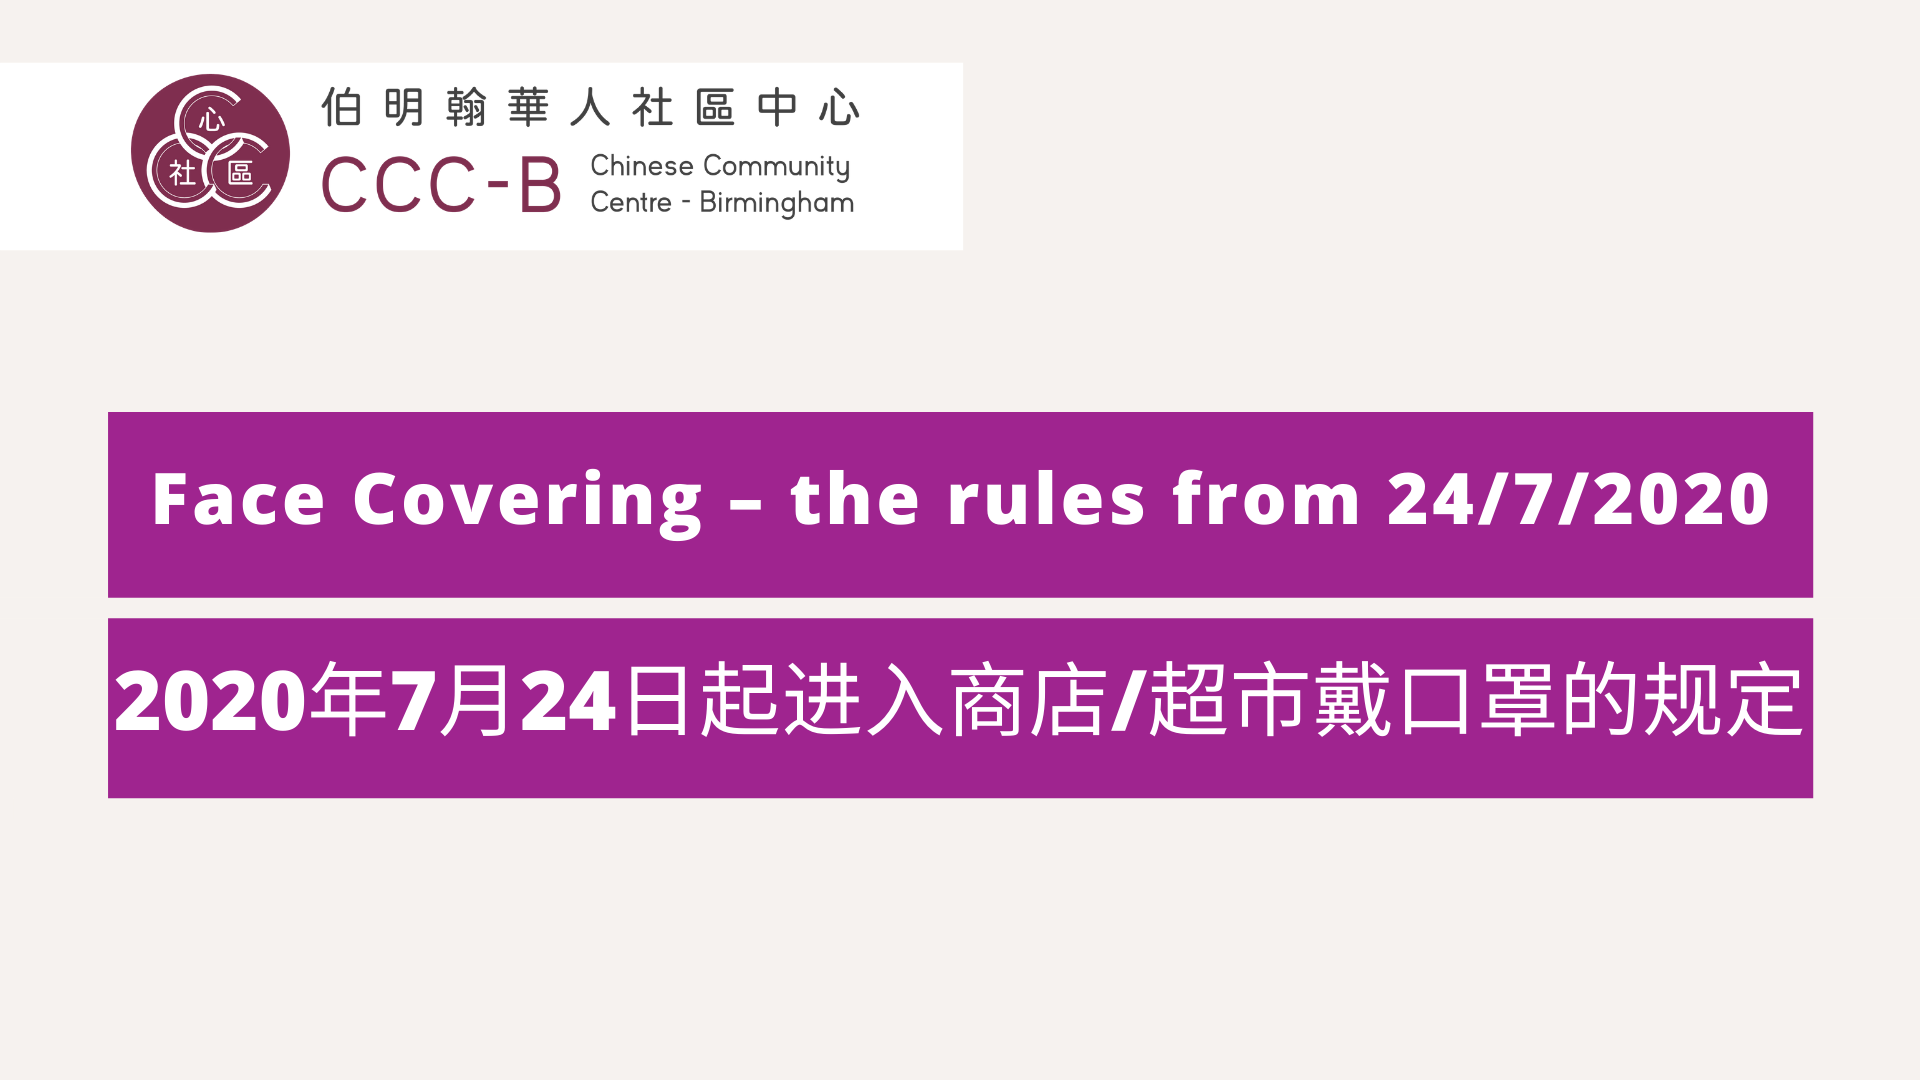 Face Covering – the rules 24/7/2020 起进入商店/超市戴口罩的规定